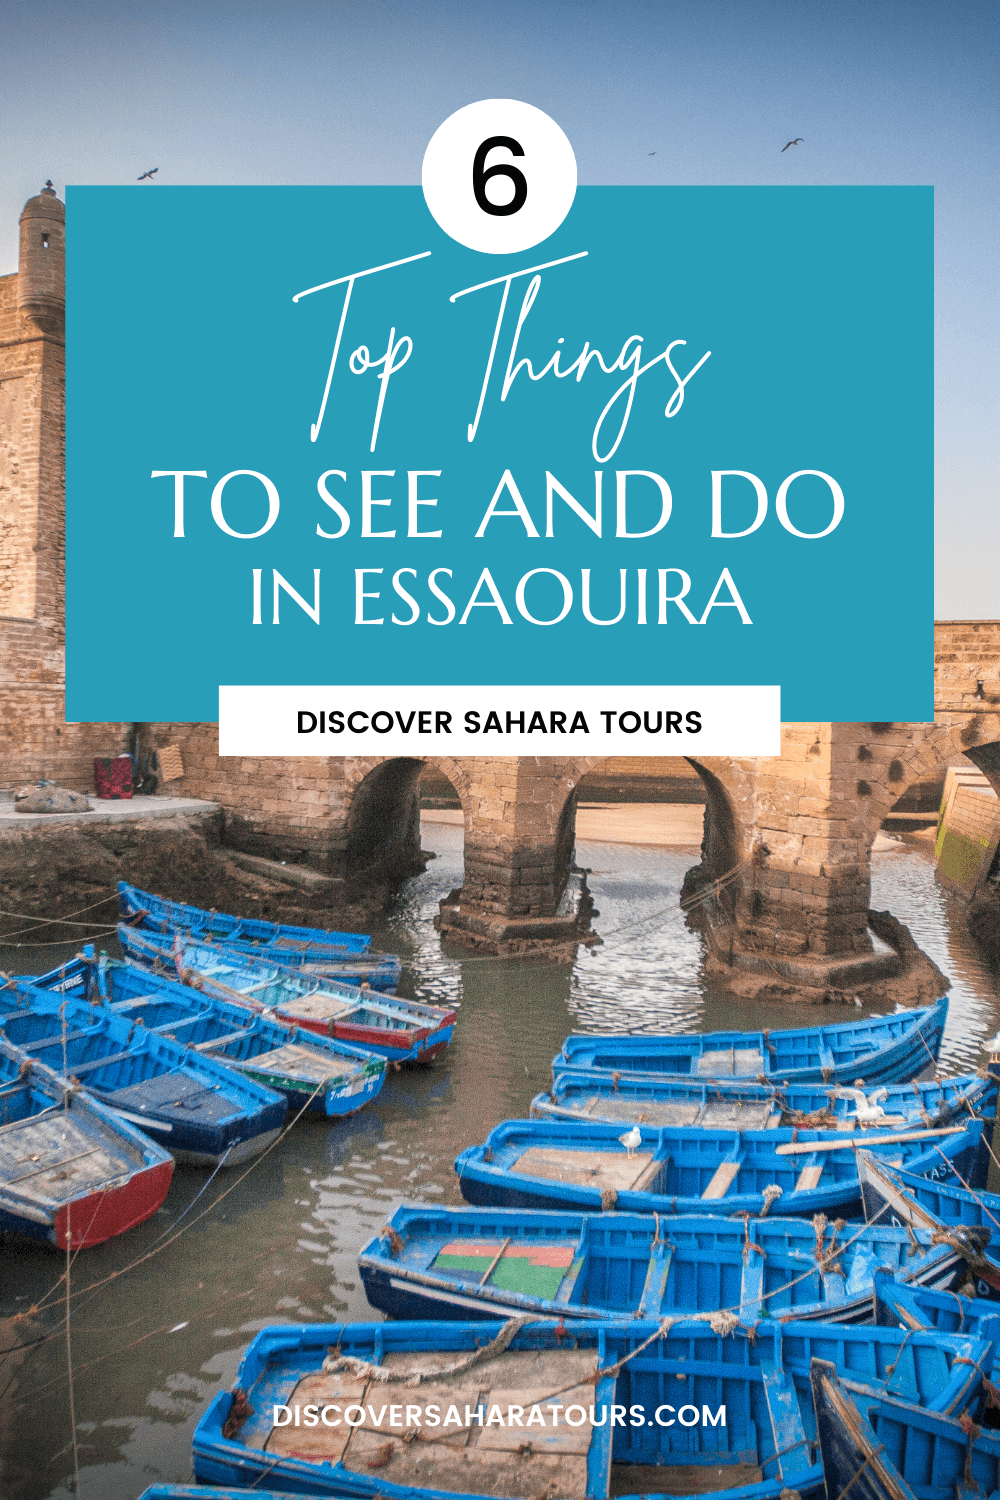 Top 6 Things to See & Do in Essaouira